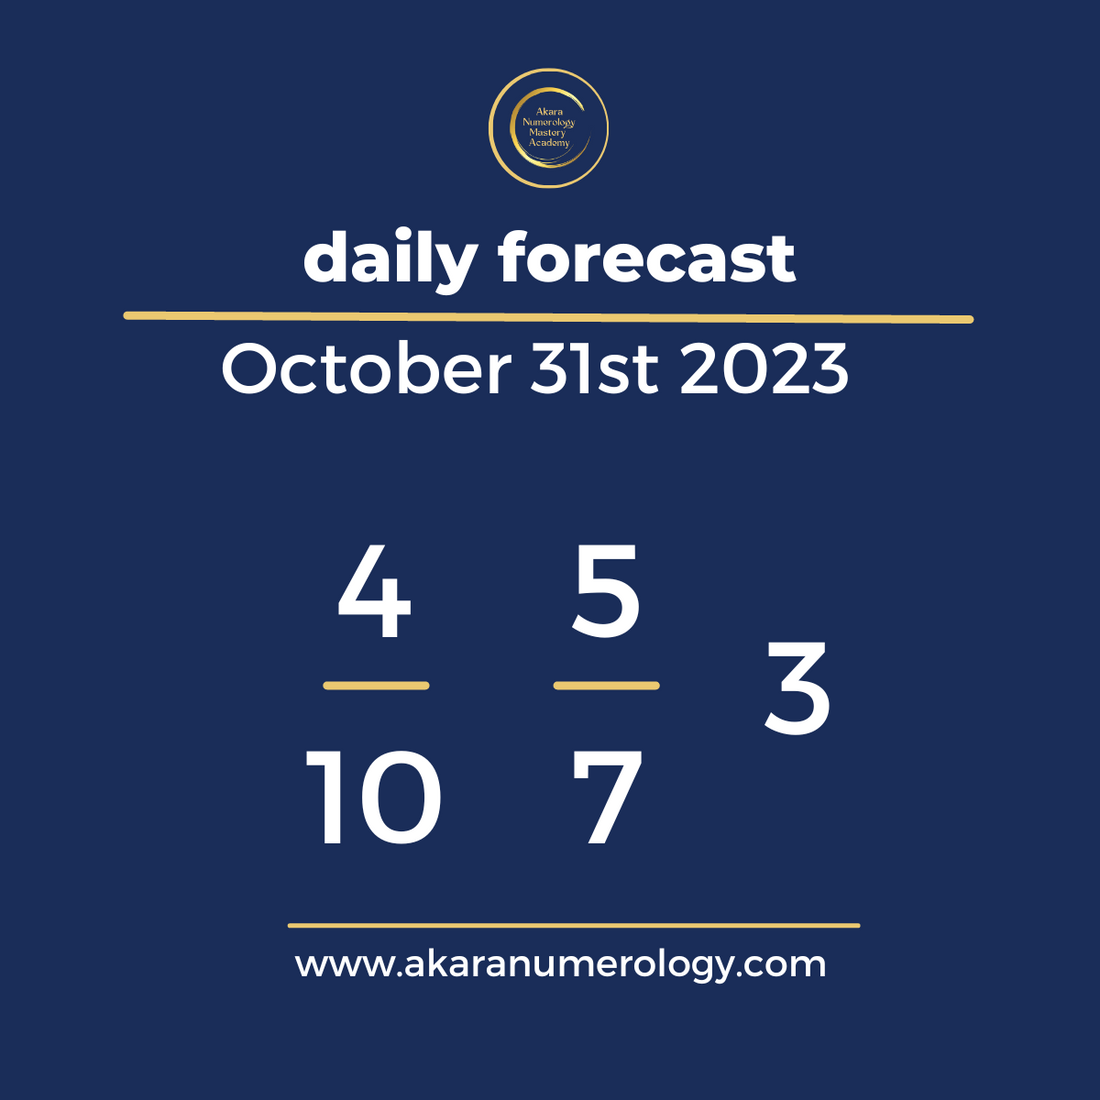 Daily forecast based upon the Akara Numerology by Sat Kirtan for October 31th 2023